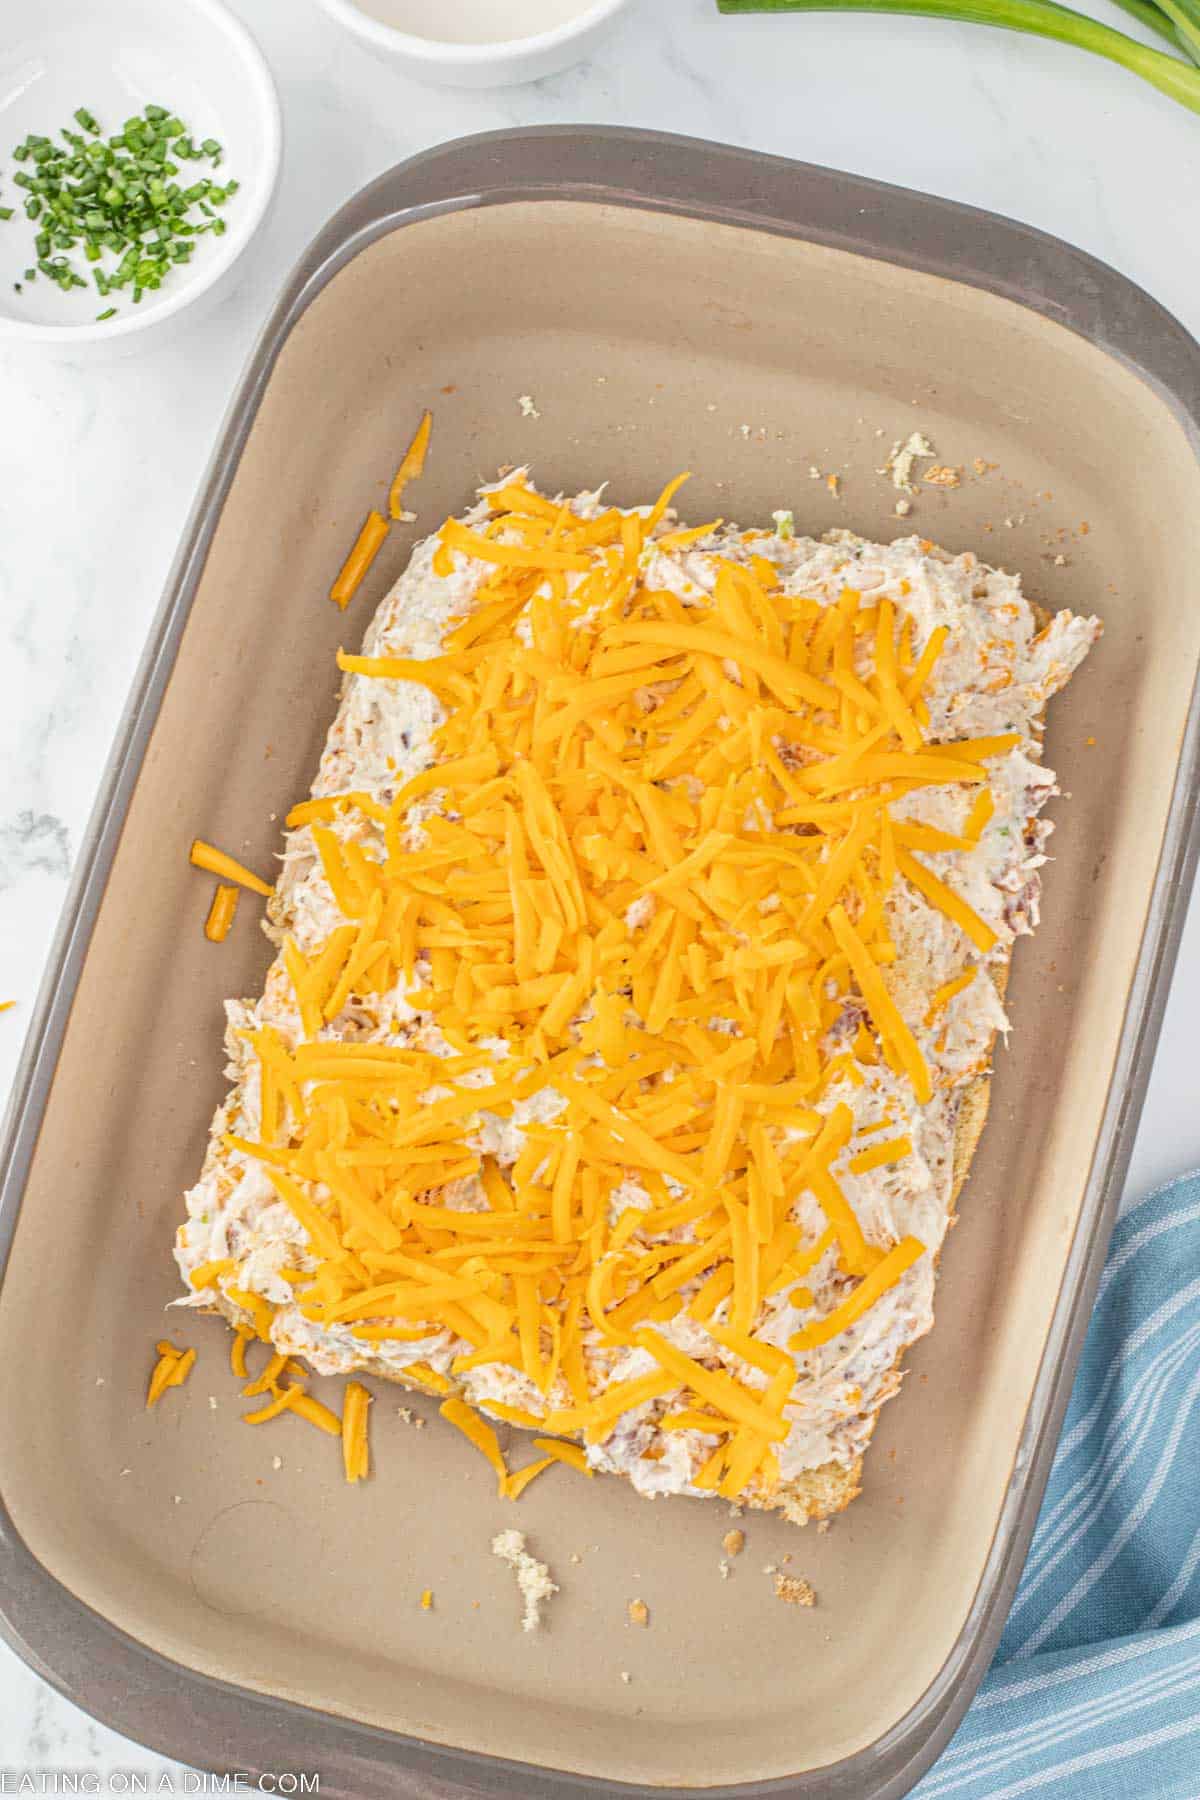 Spread the chicken mixture on the bottom rolls in a baking dish and topped with shredded cheese